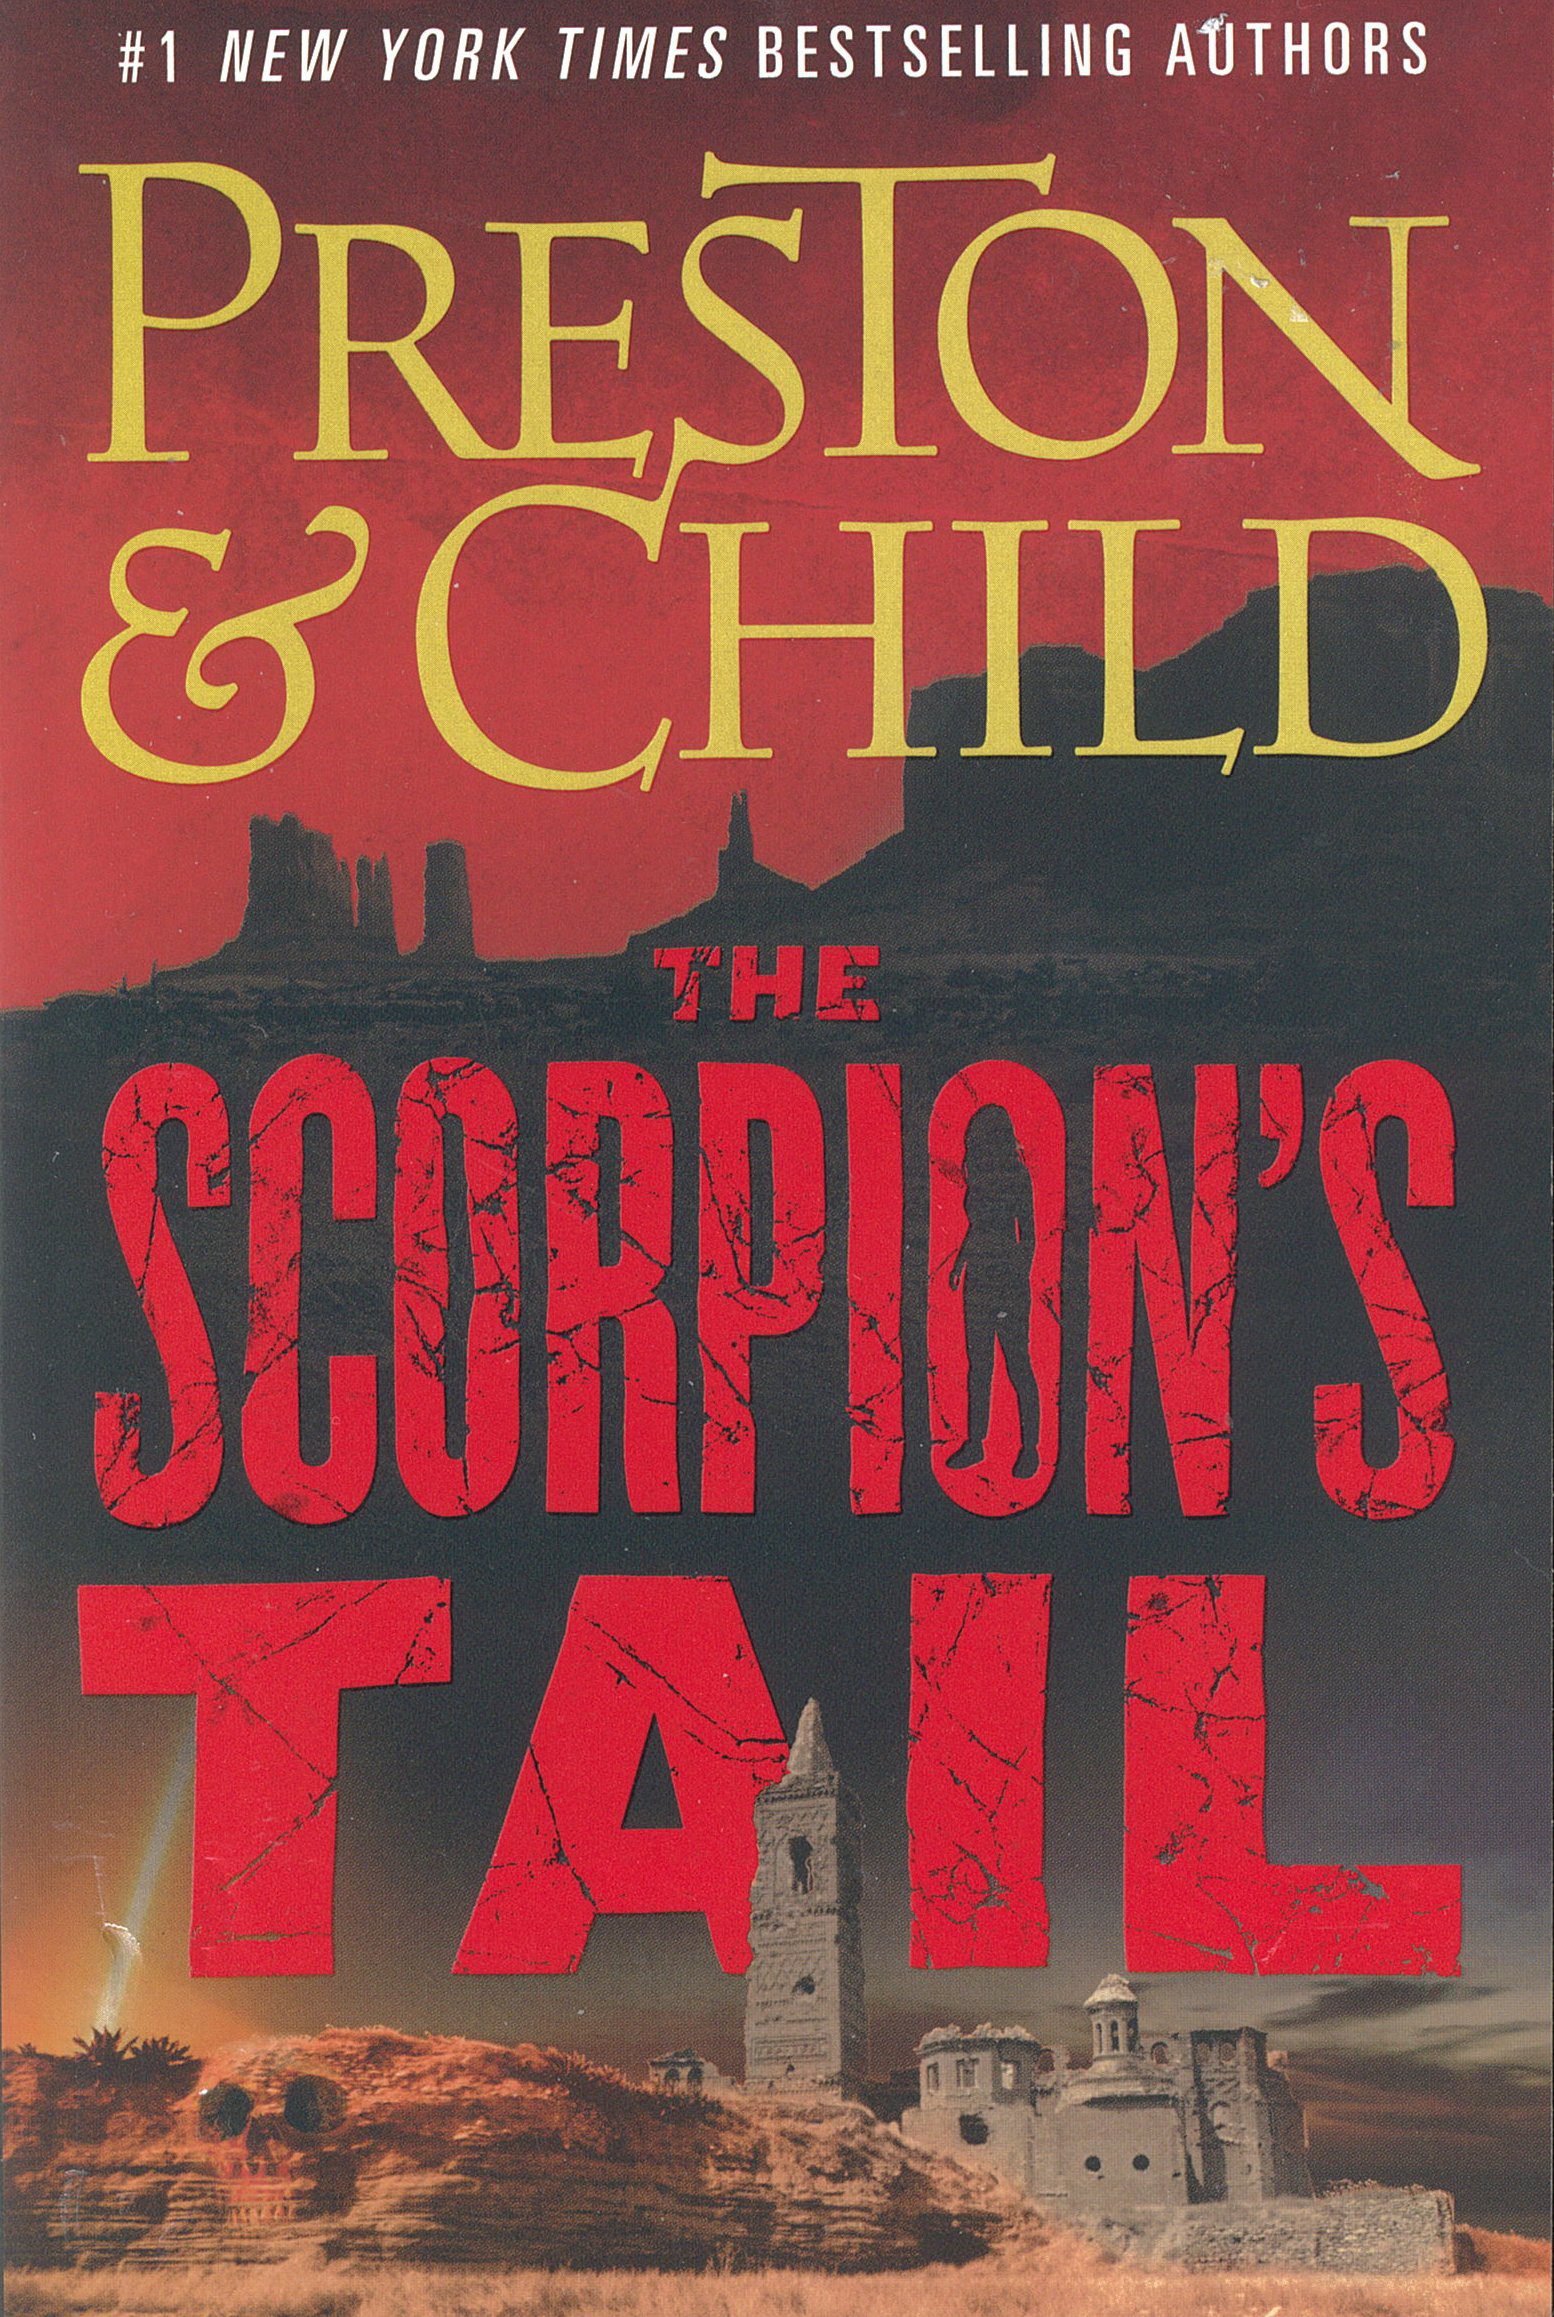 Scorpion's Tail Book Review By Ron Fortier